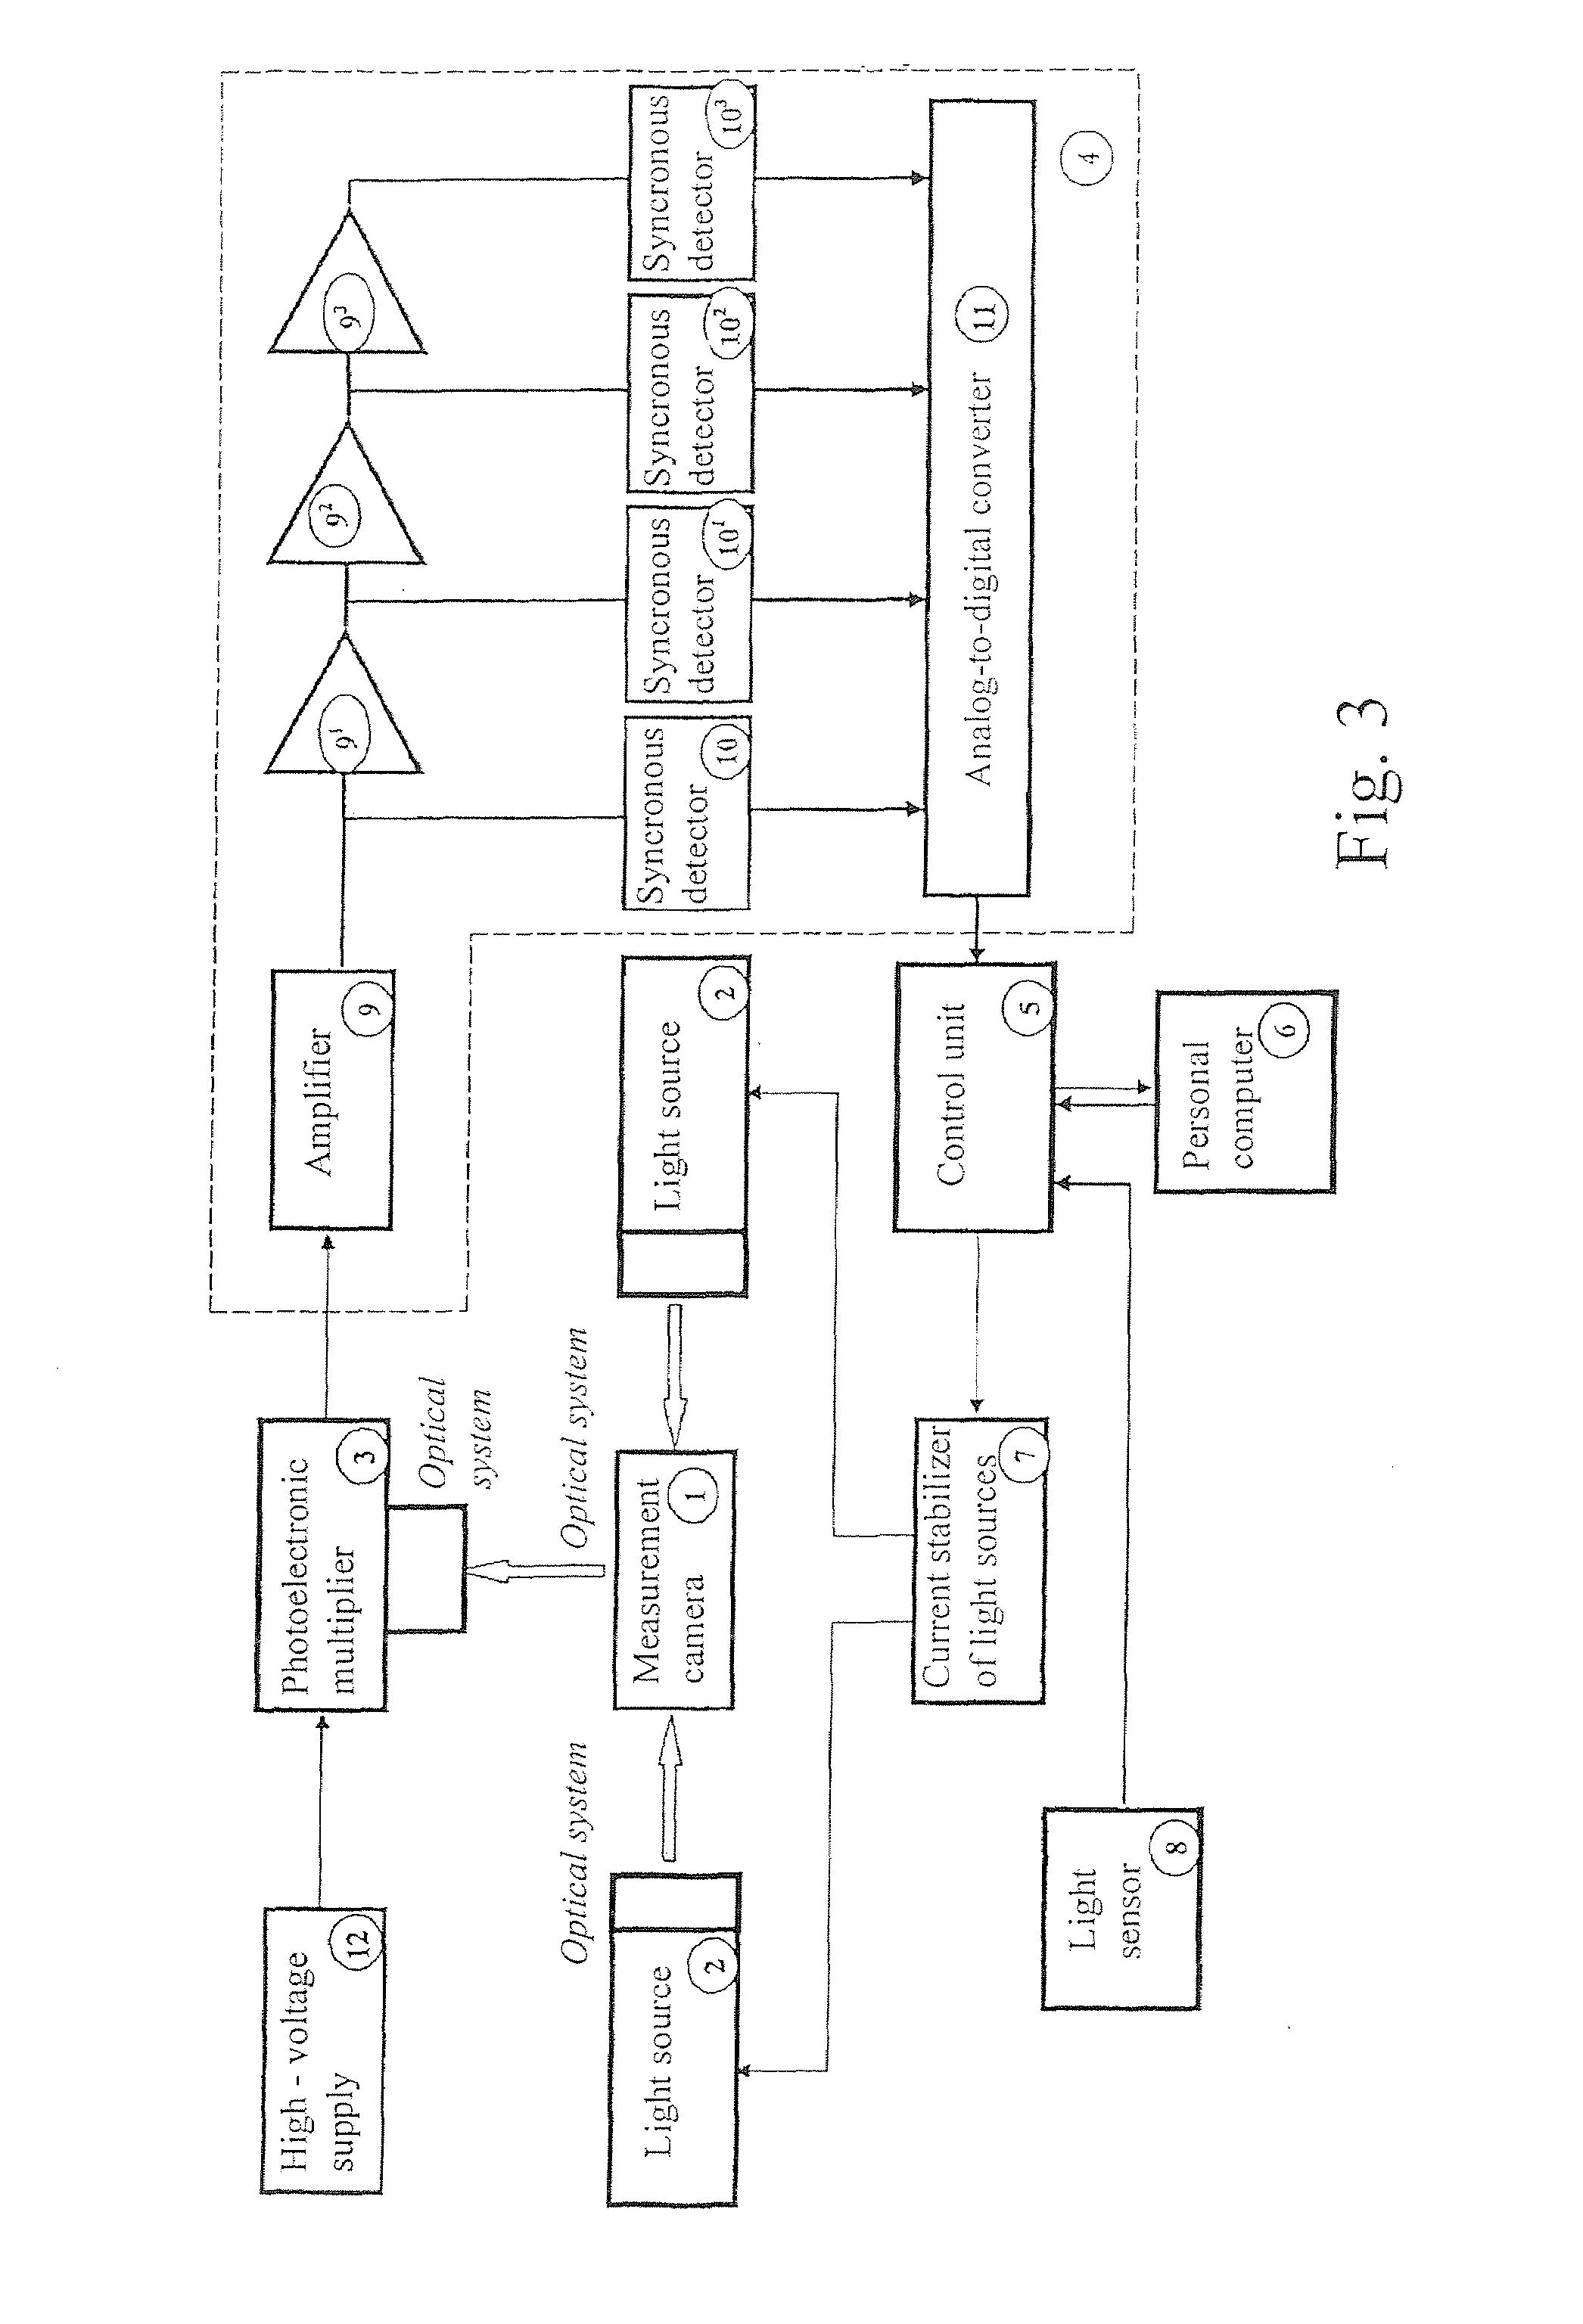 Method for fluorometrically determining photosynthesis parameters of photoautotropic organisms, device for carrying out said method and a measurement chamber